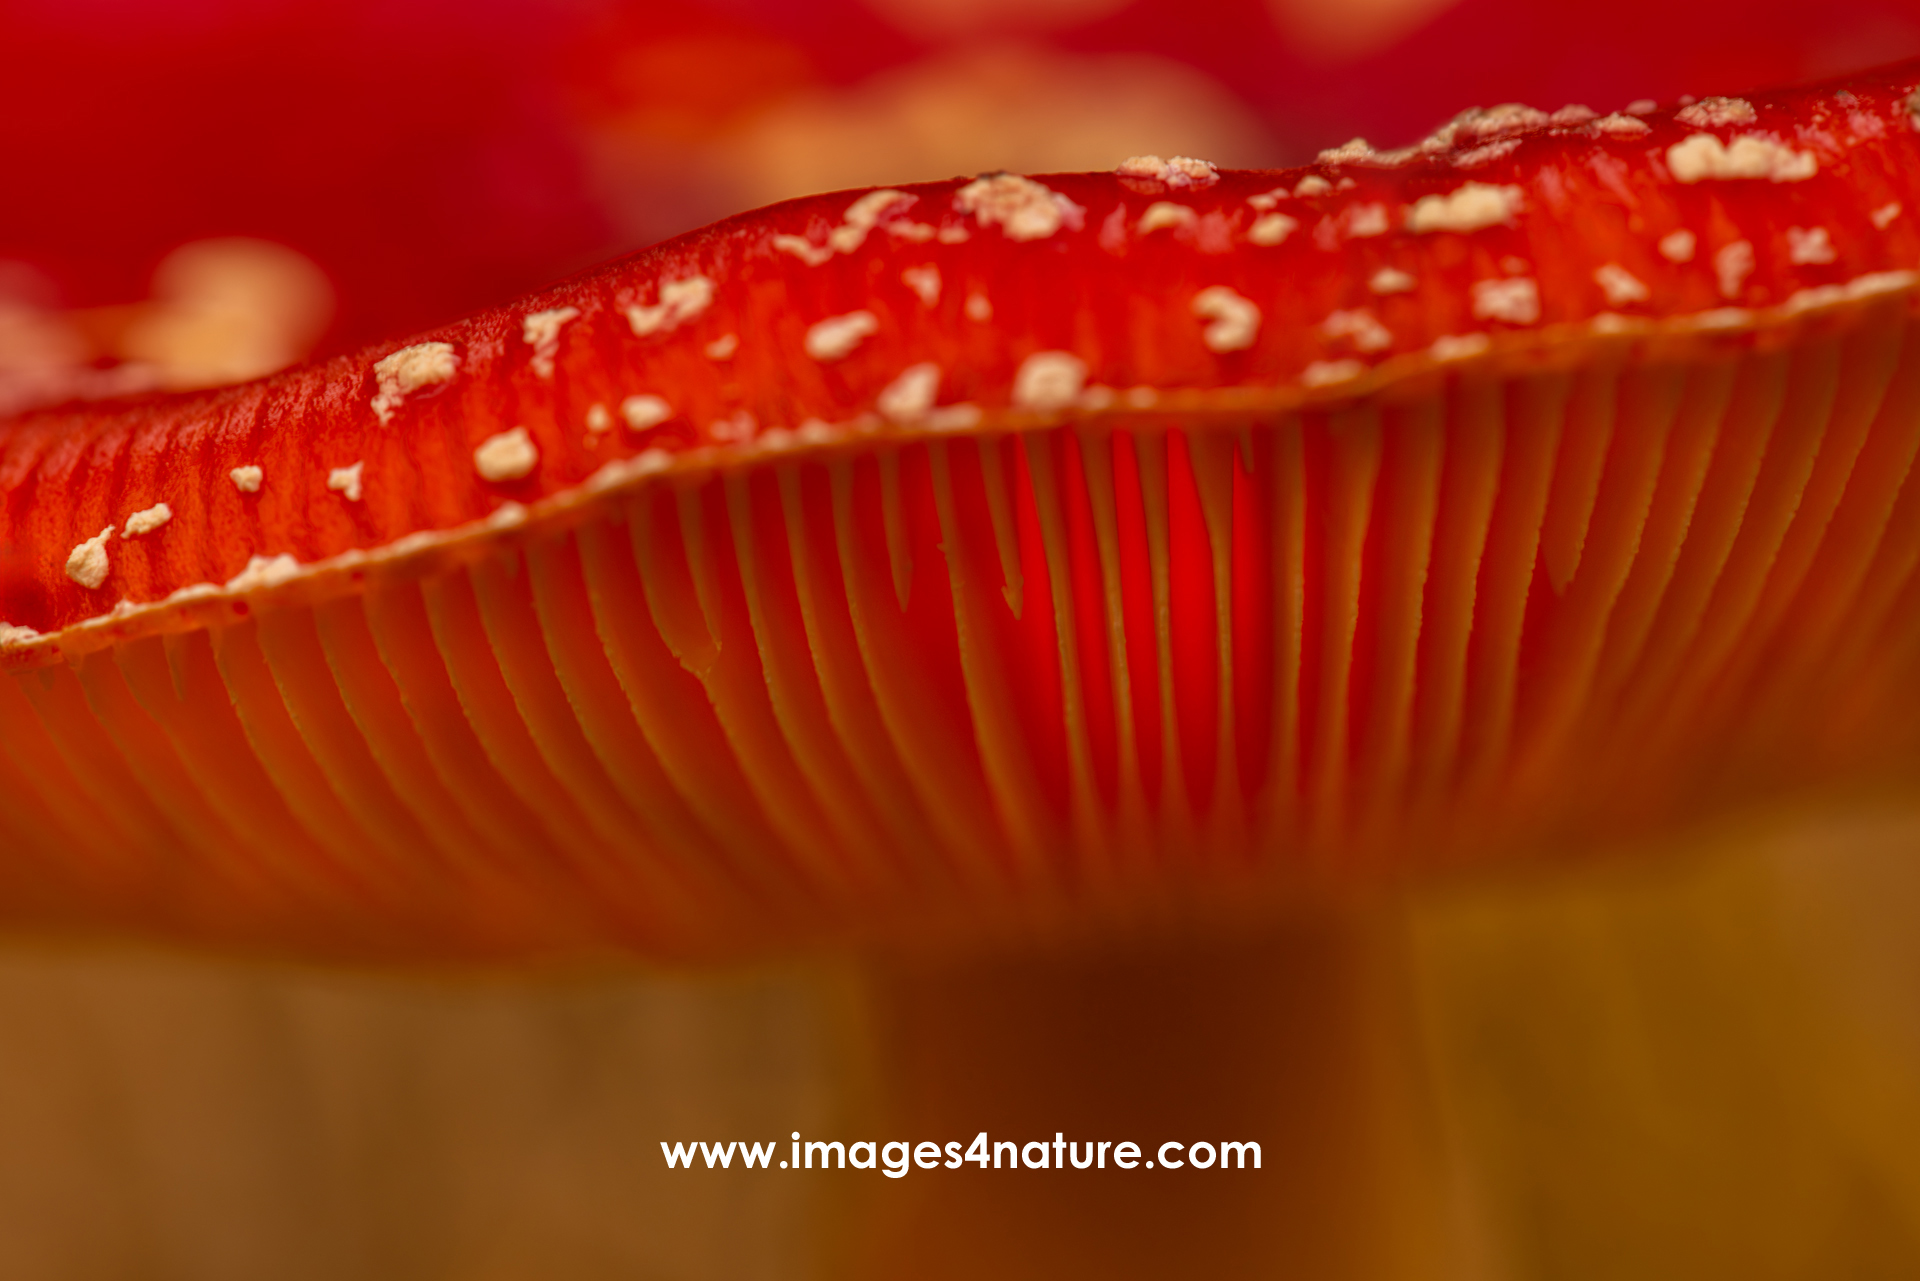 Partial view of the cap and slats of a fly agaric